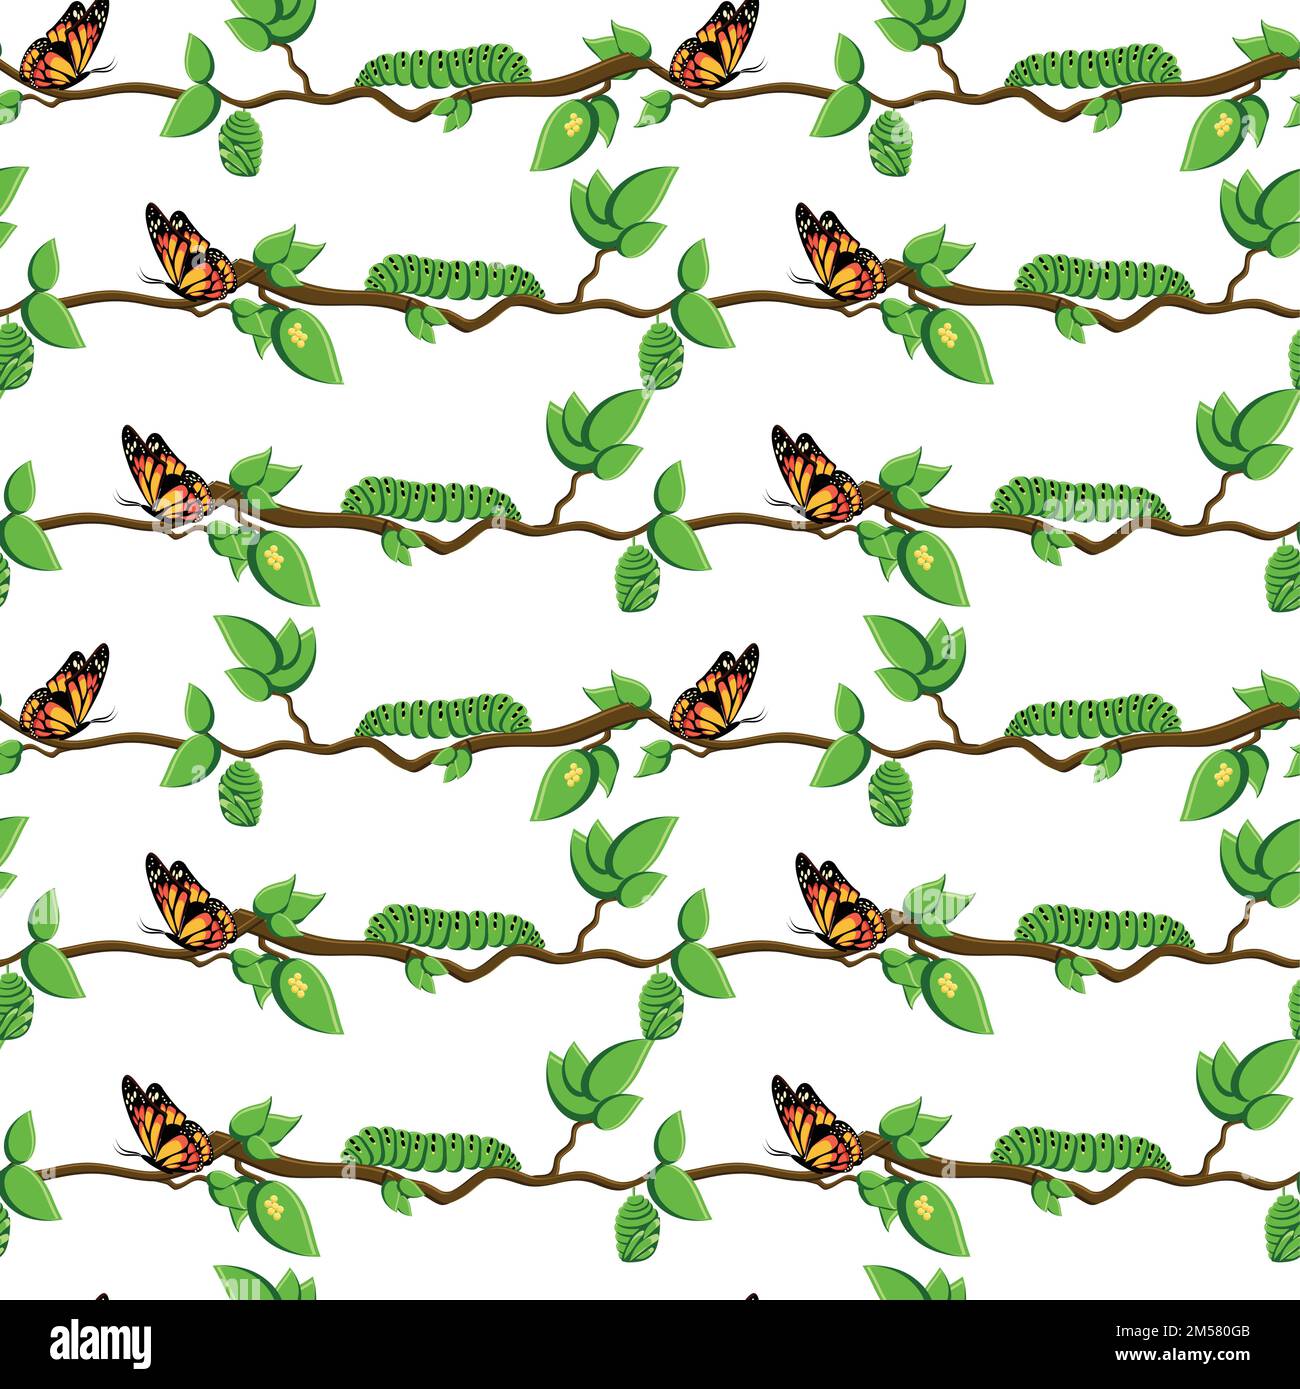 Life cycle of butterfly, metamorphosis seamless pattern. Butterfly, eggs, pupa, caterpillar on tree branch and leaves isolated on white background. Ca Stock Vector